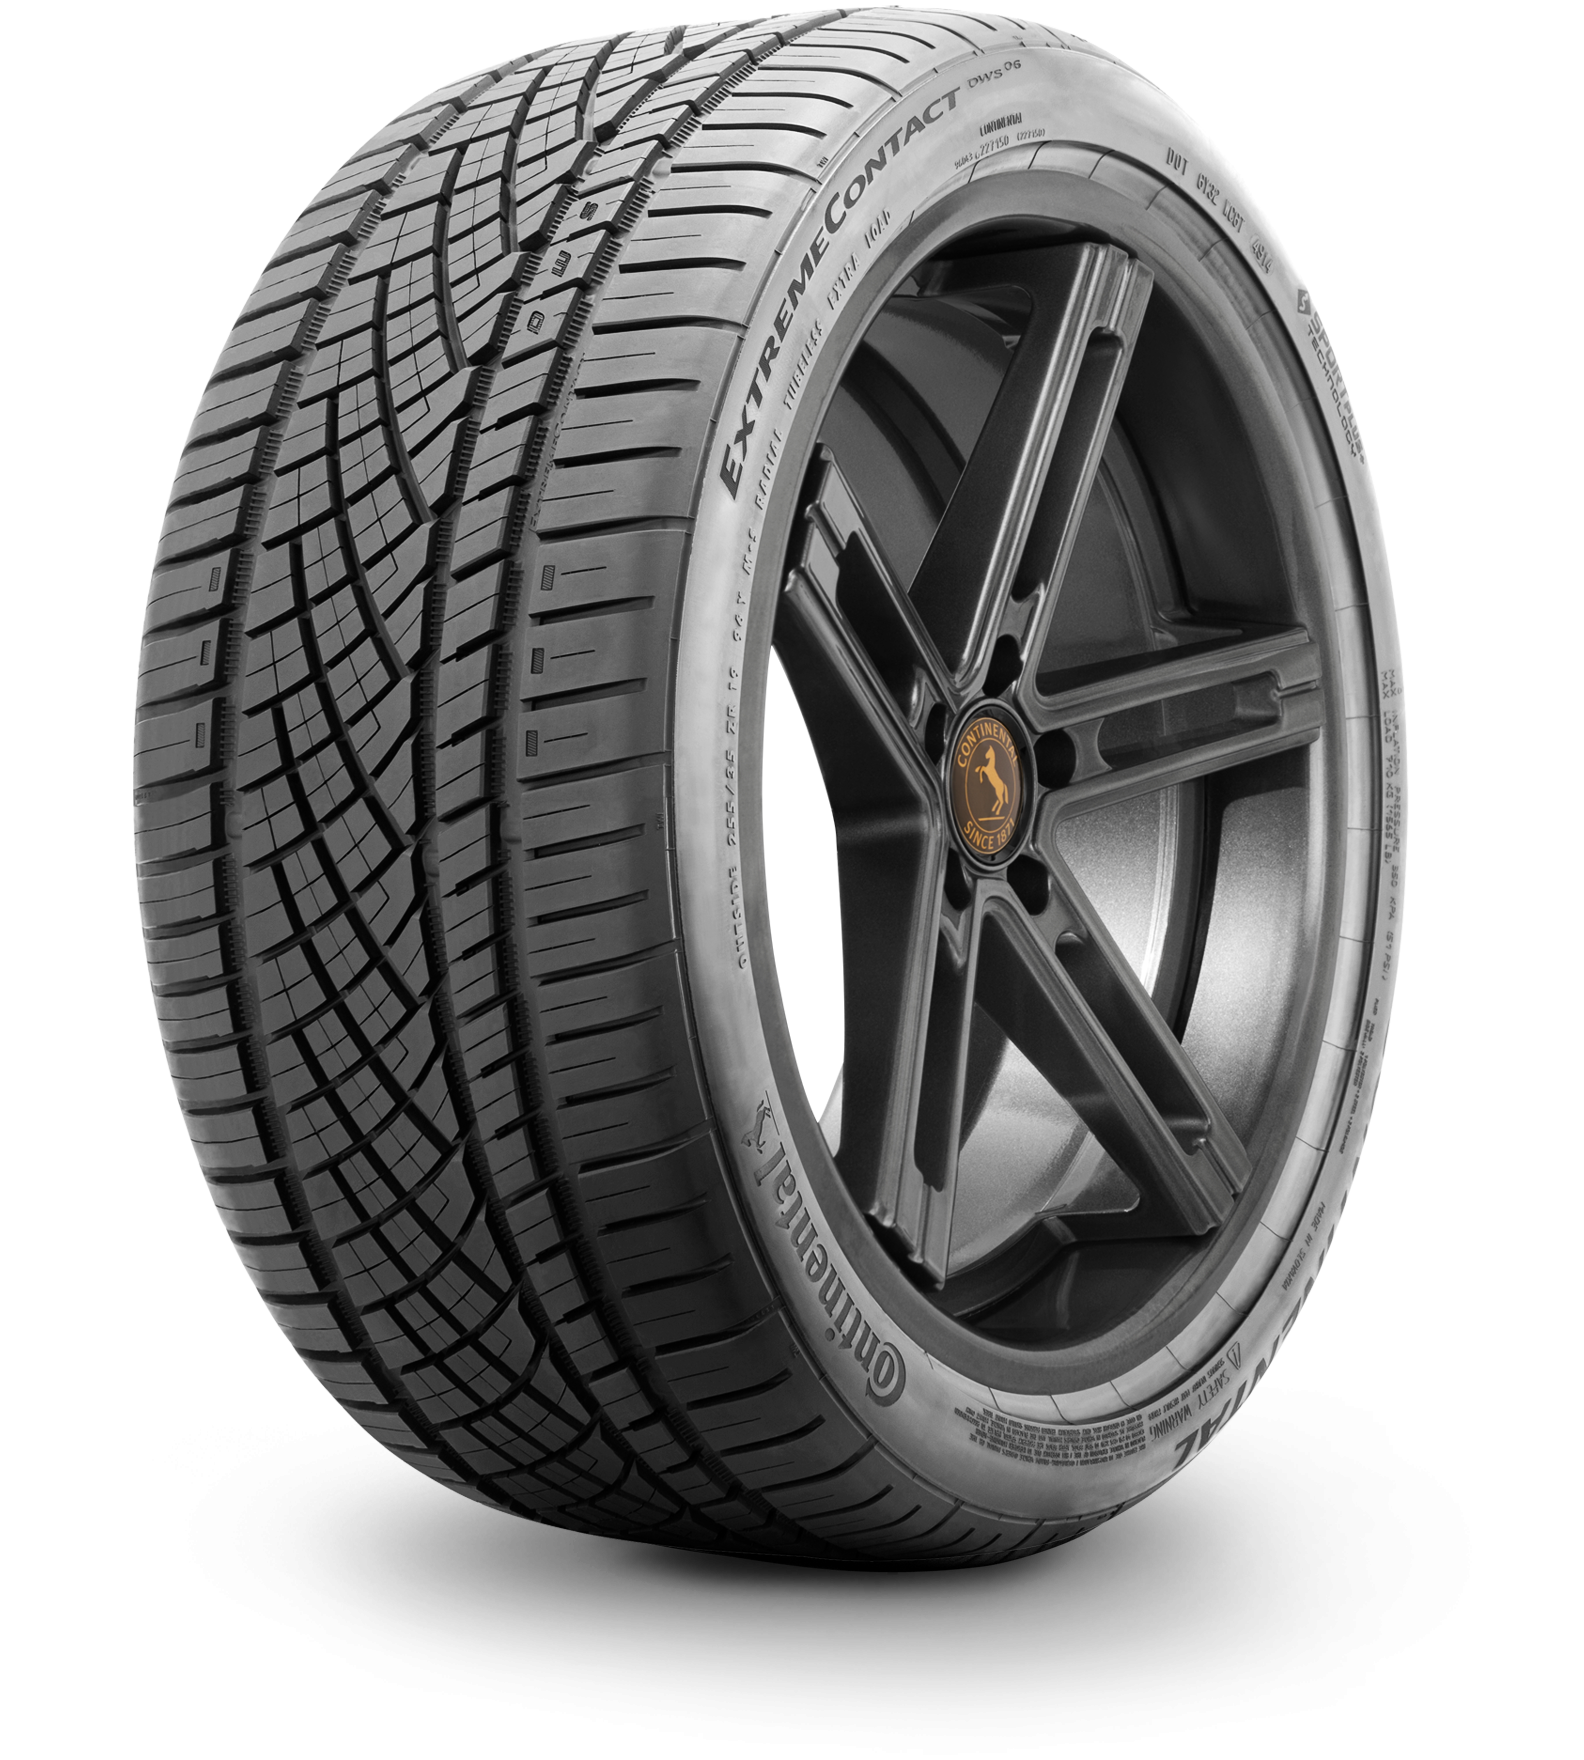 Continental ExtremeContact DWS06 Tire Rating Overview Videos